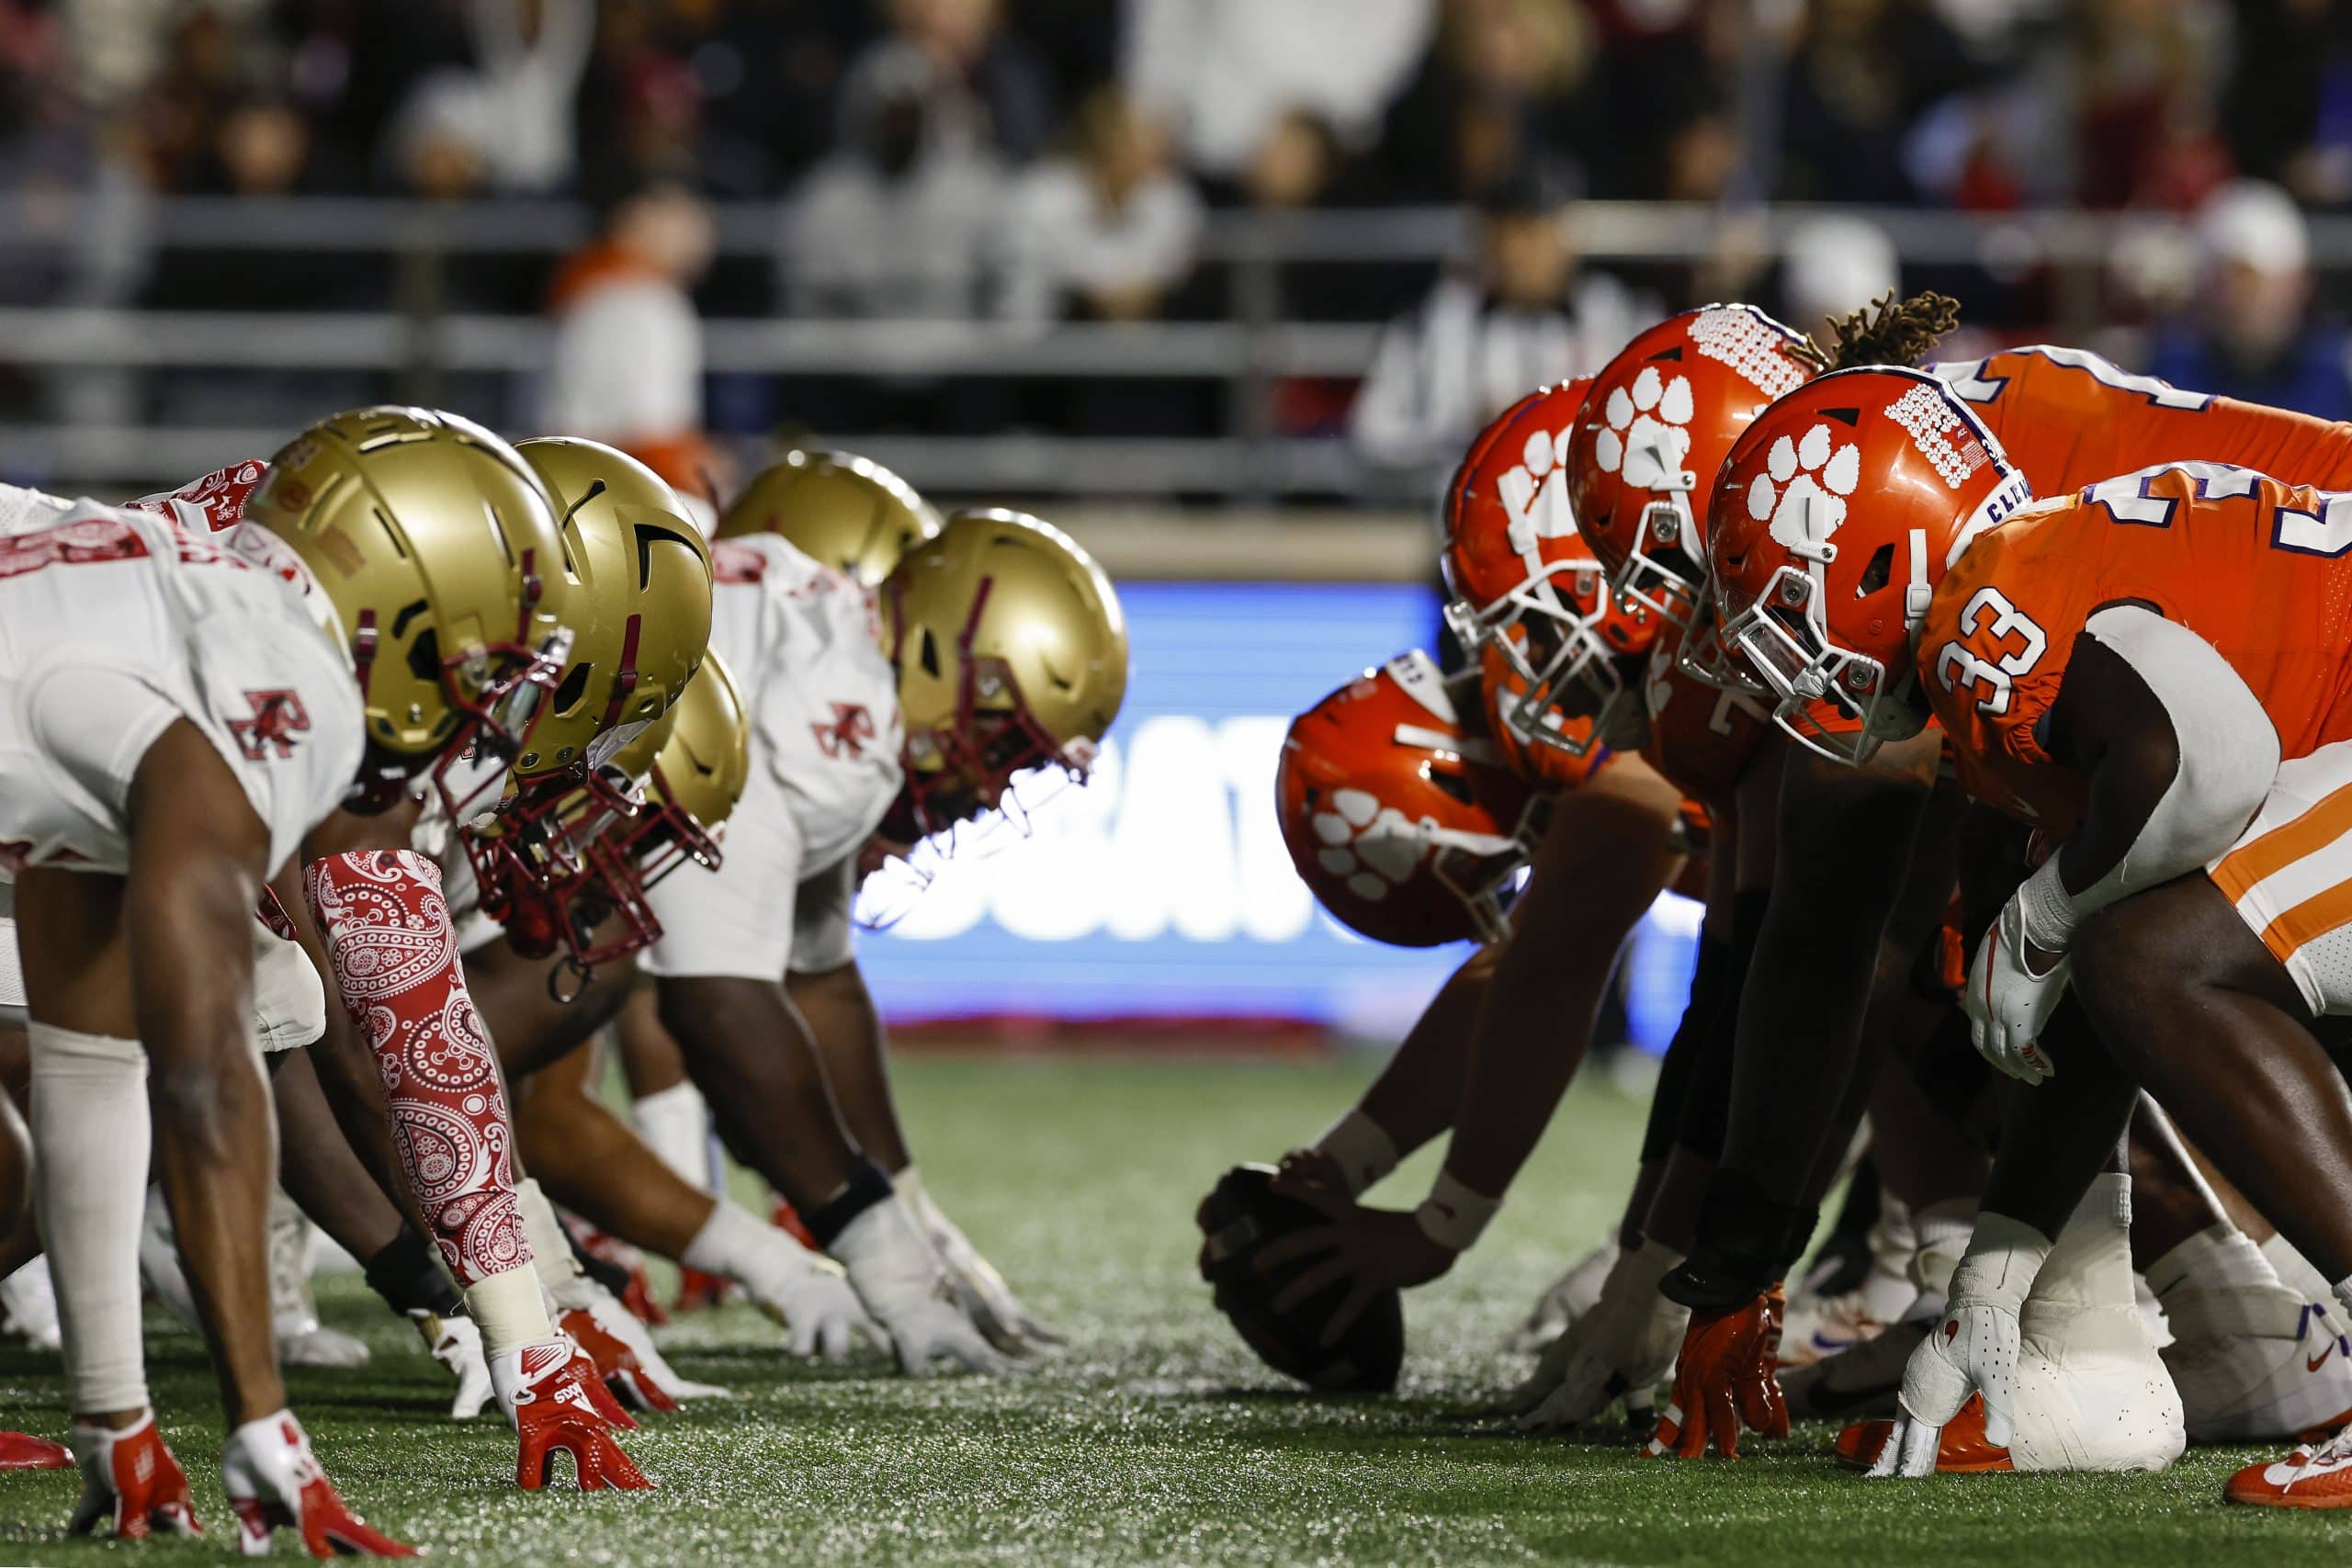 Oct 8, 2022; Chestnut Hill, Massachusetts, USA; ACC teams the Clemson Tigers and the Boston College Eagles line up for the snap at the line of scrimmage during the second quarter at Alumni Stadium.